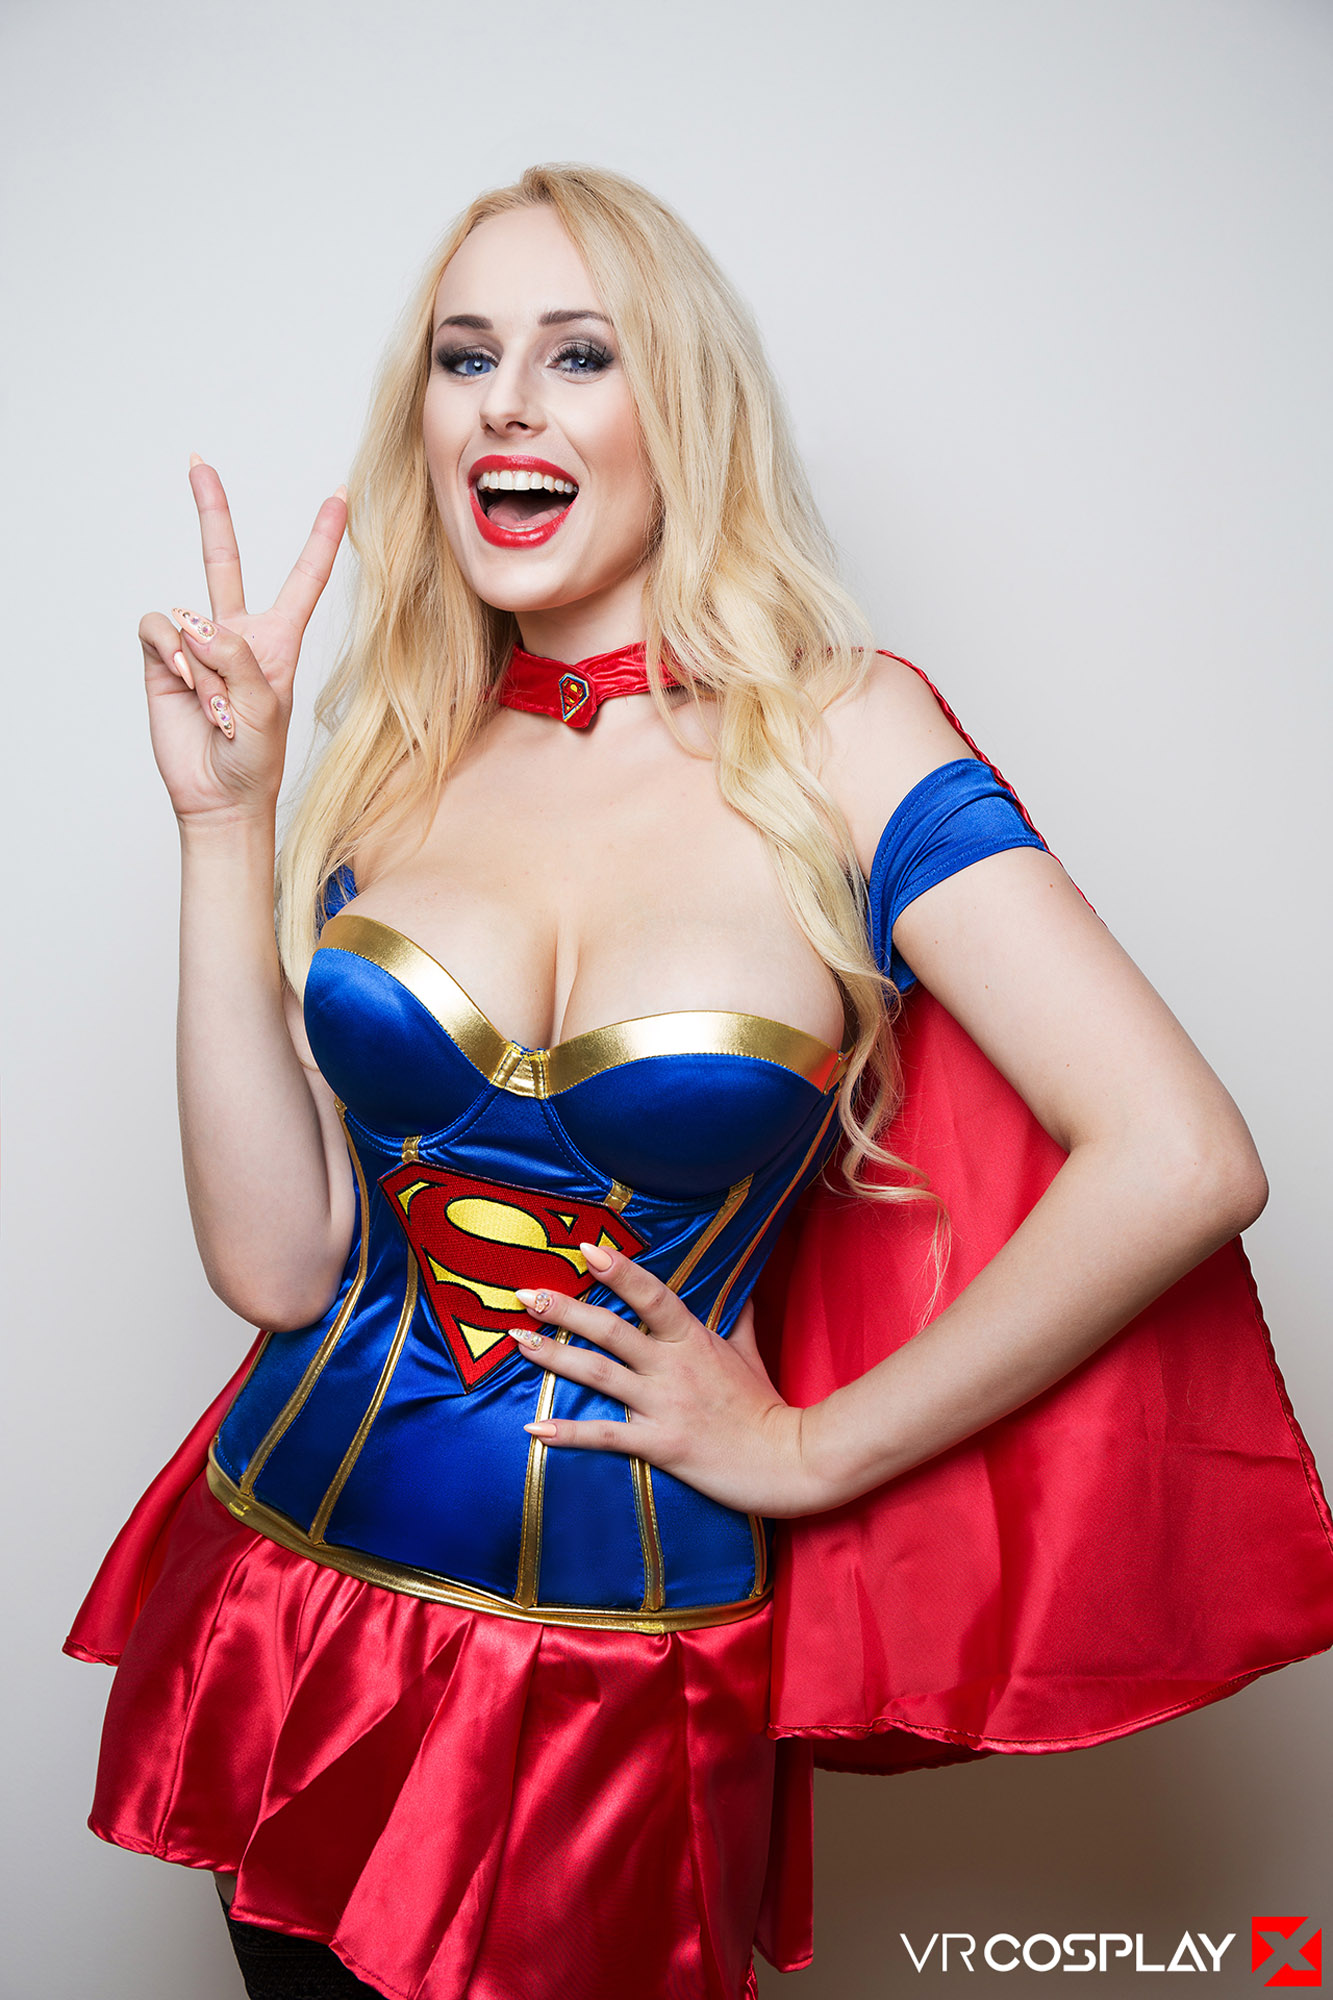 Click here to experience the whole supergirl scene @ VR Cosplay X.